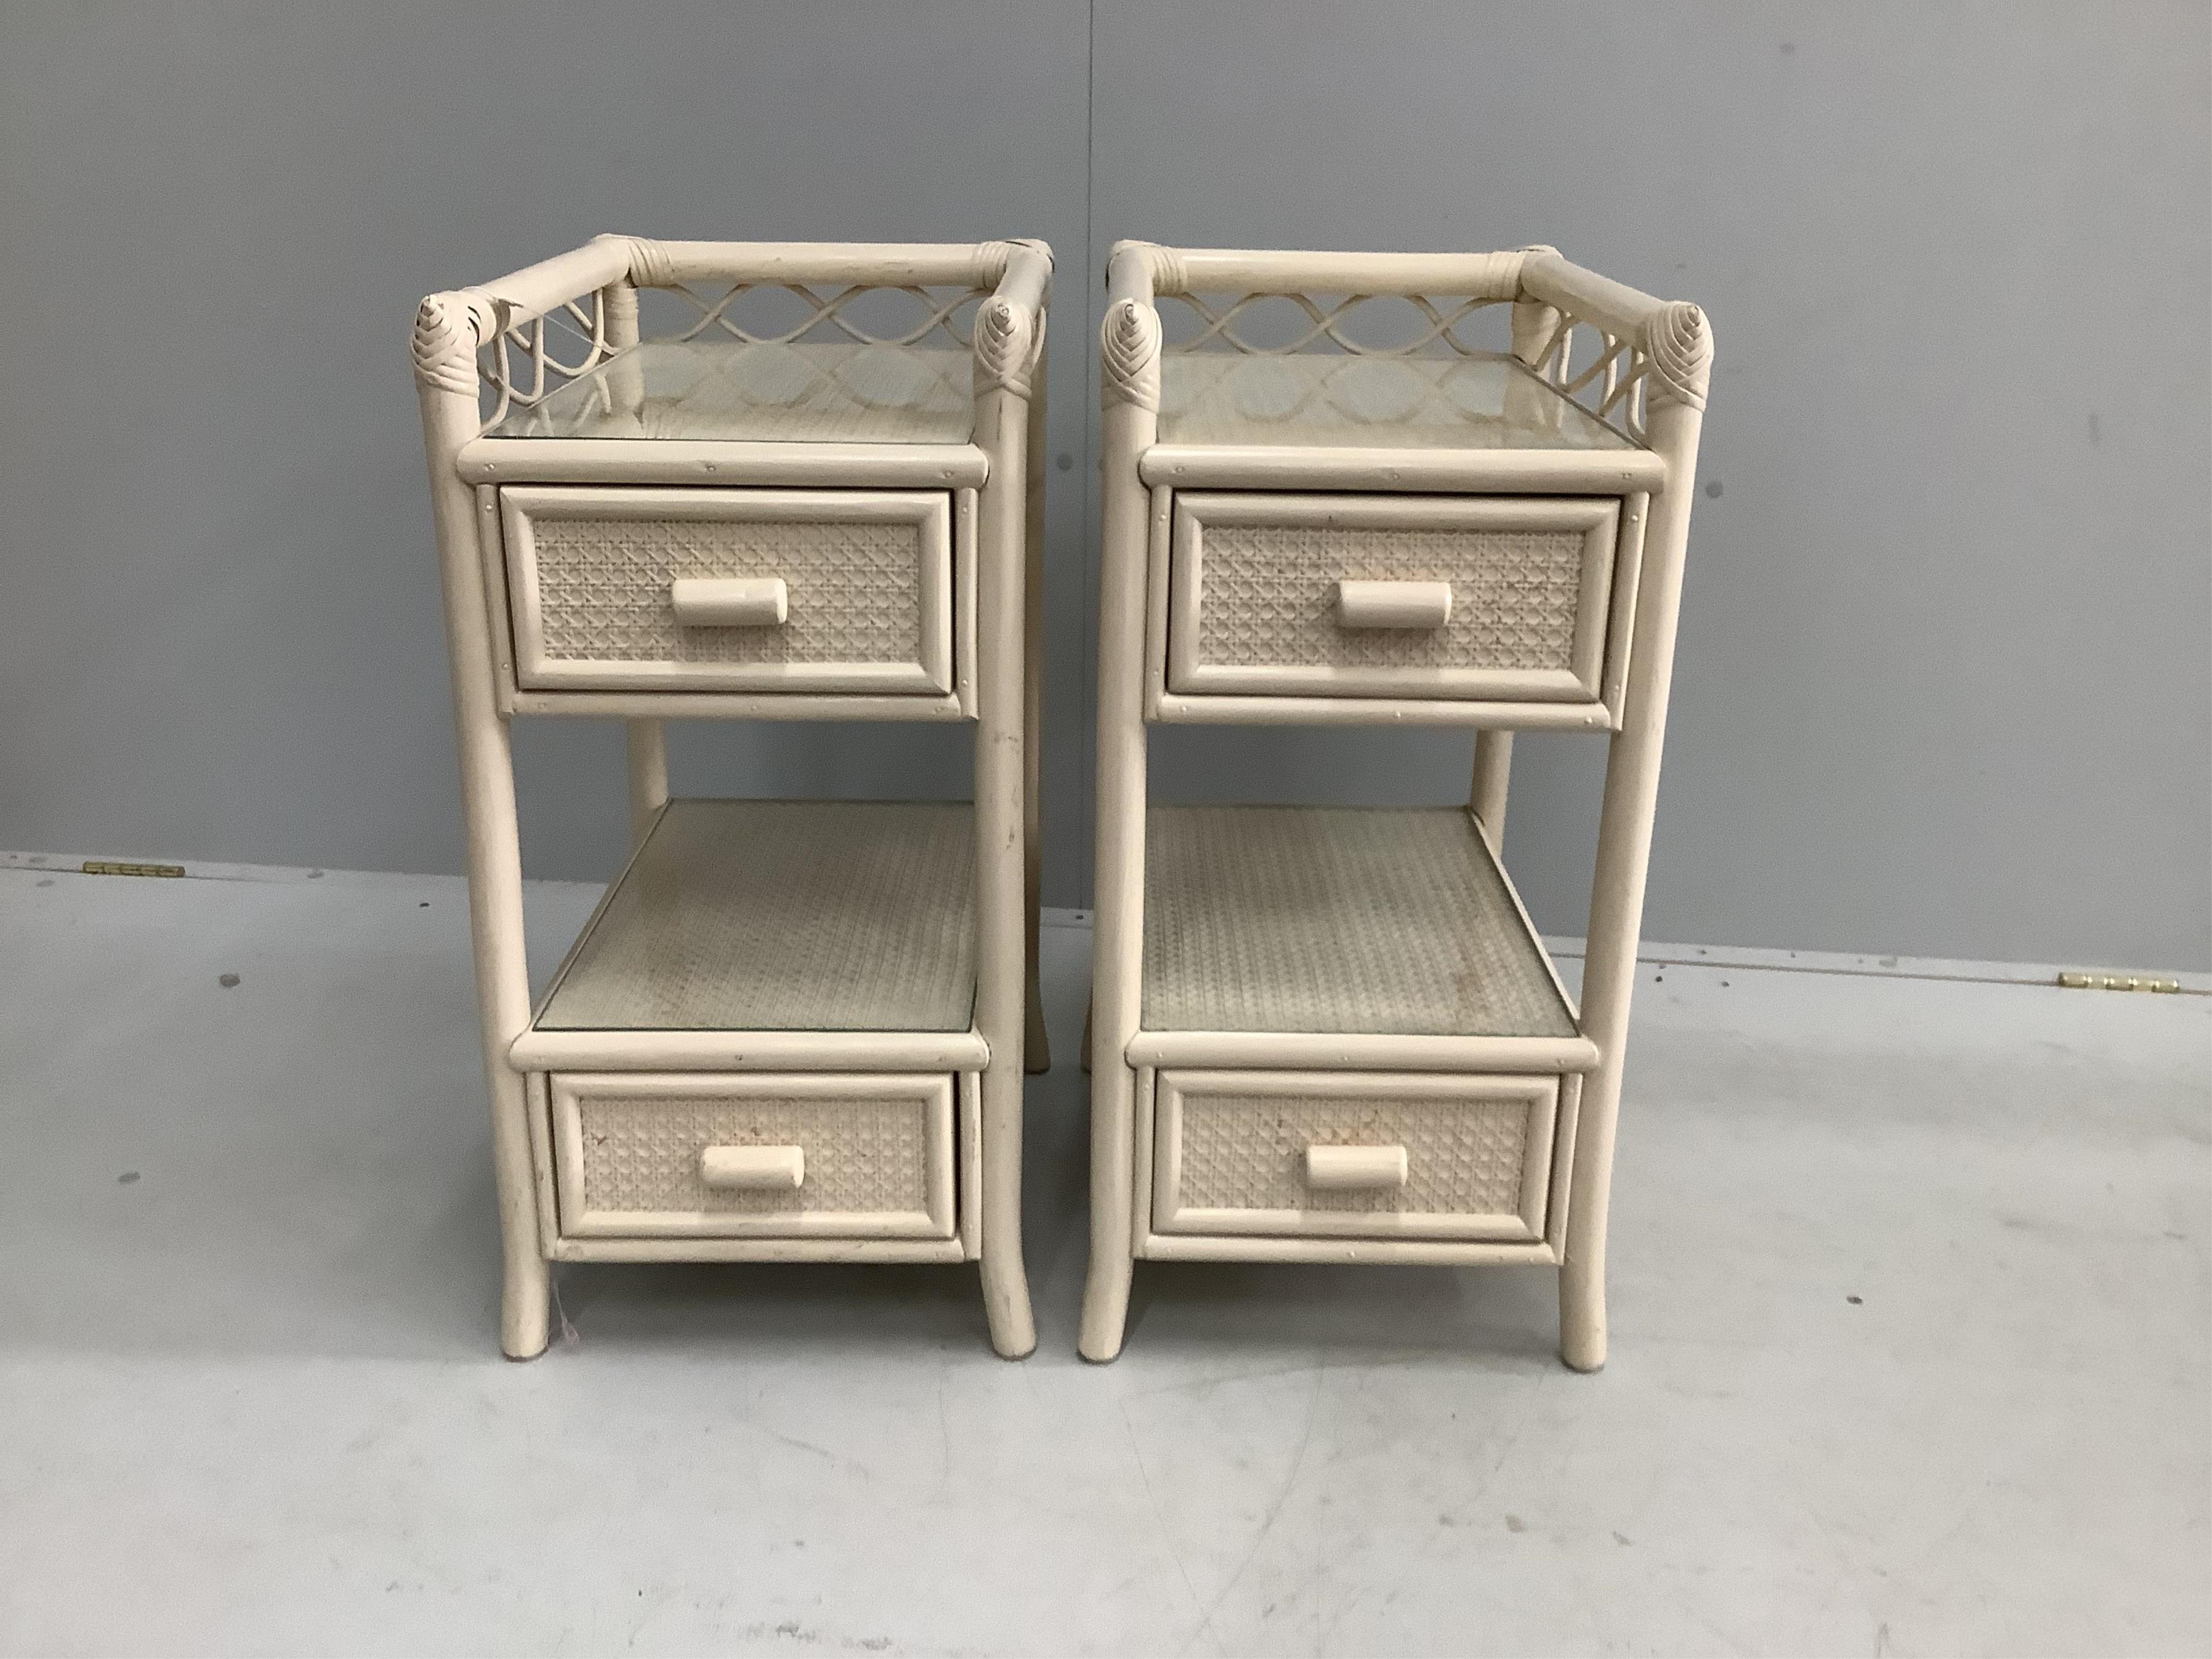 A pair of Angraves Furniture carved bamboo side tables, width 35cm, depth 46cm, height 70cm. Condition - good